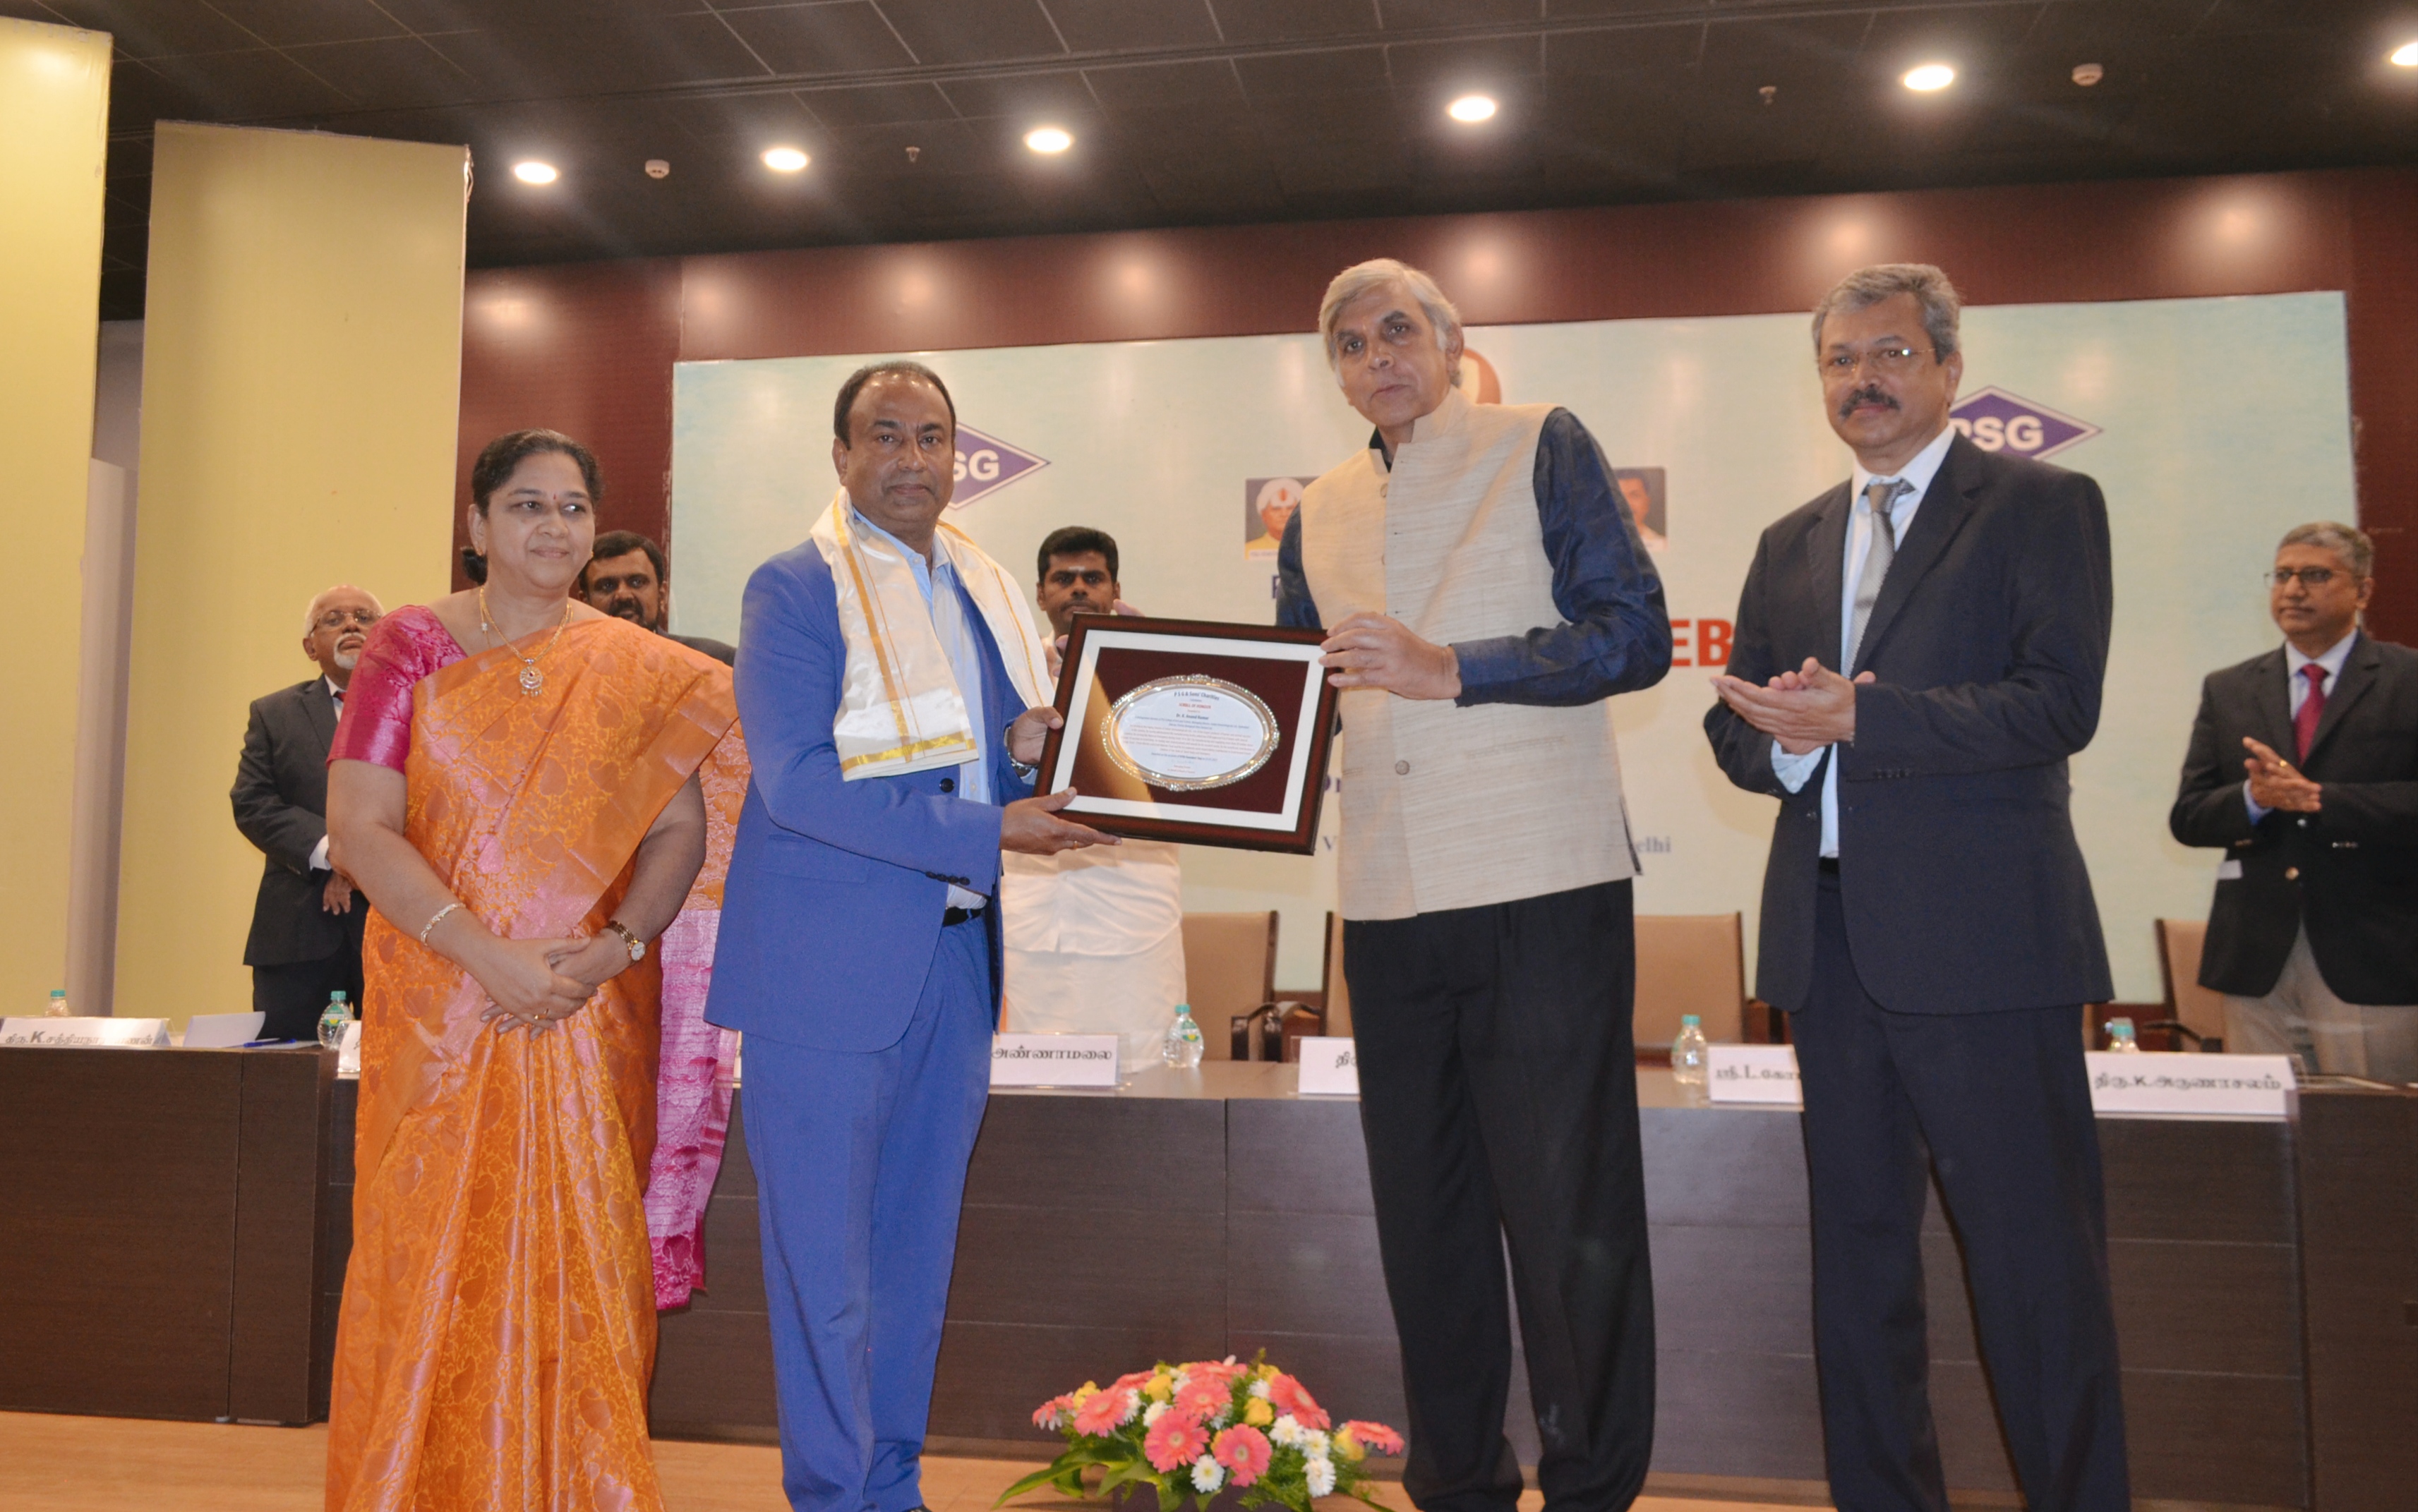 Indian Immunologicals’ MD Dr. K. Anand Kumar felicitated for his remarkable contribution to the field of Life Sciences by PSG Sons and Charities